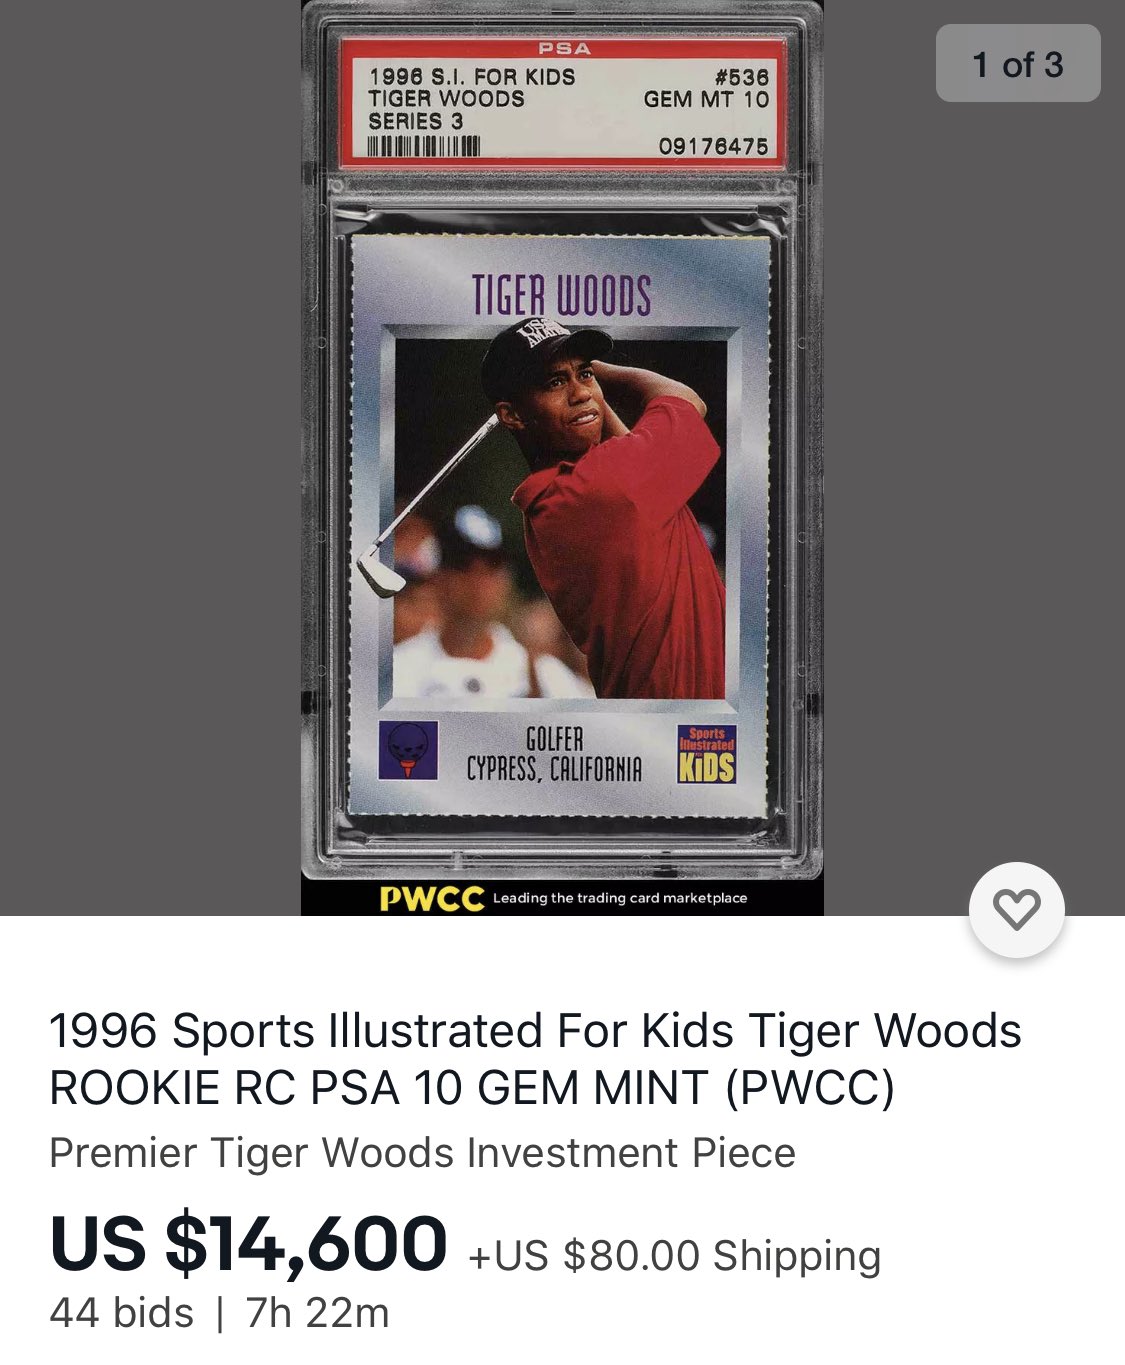 Patrick Ryan On Twitter Another Crazy Sports Card Auction Ending Tonight A Rare Psa 10 Grade Of The 1996 Tigerwoods Card From Sports Illustrated For Kids A Sheet Of 9 Cards